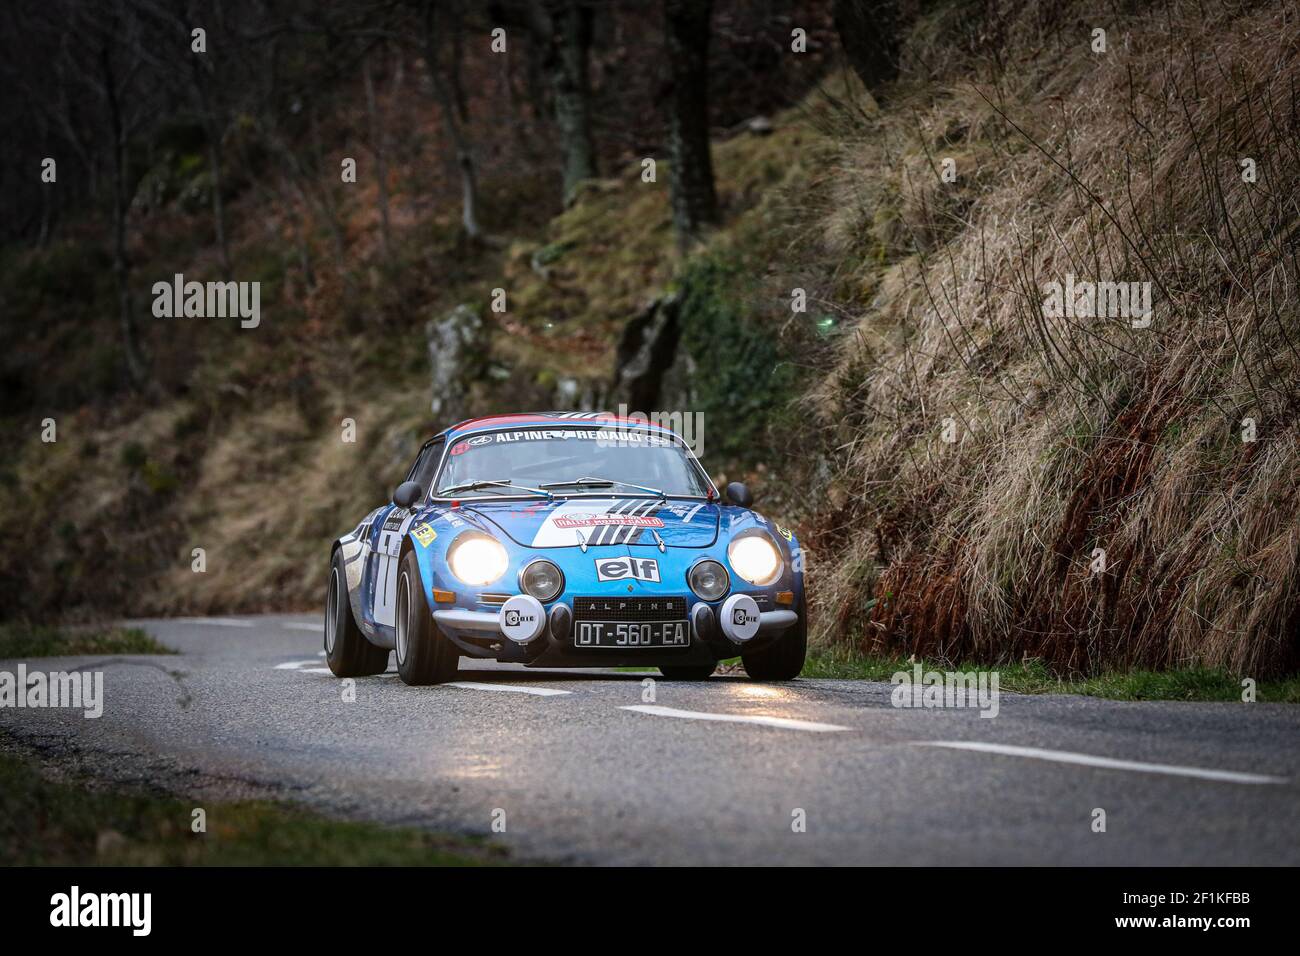 07 VIALAR Bernard (FRA), TAUS Quentin (FRA), ALPINE-RENAULT A110 1600 SC, 1973, ASSO JULES BIANCHI, Action during the 2020 Rallye Monte Carlo Historique from january 30 to february 4 1 at Monaco - Photo Alexandre Guillaumot / DPPI Stock Photo